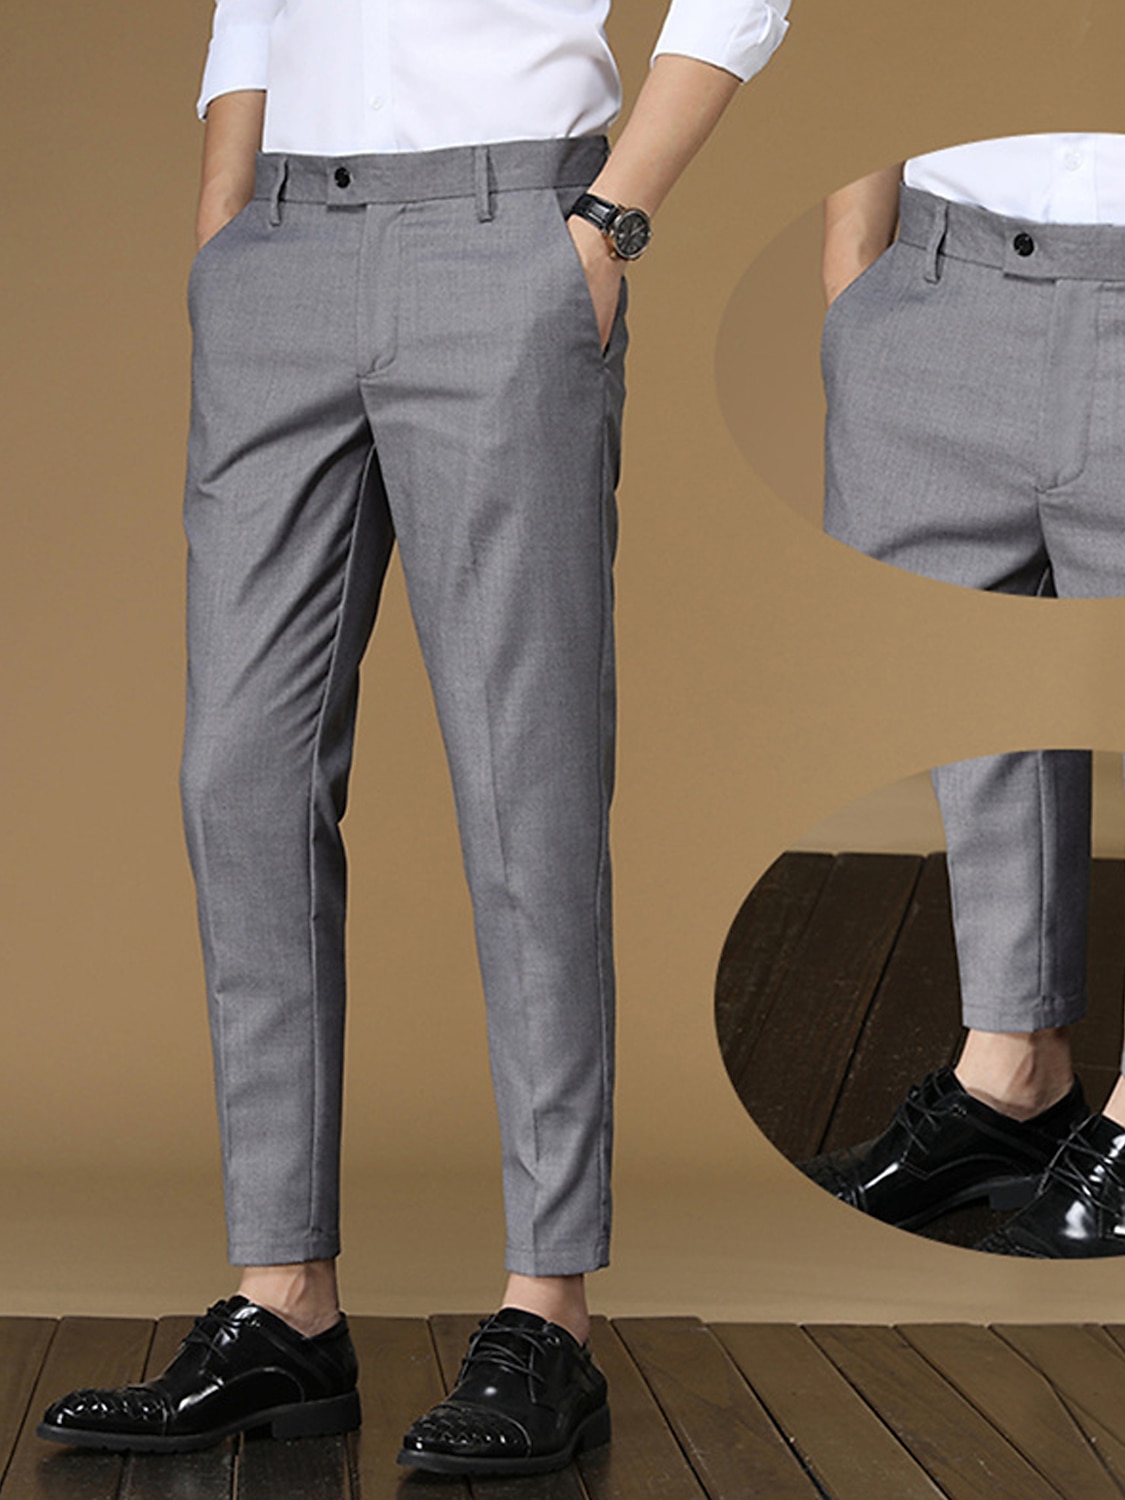 Buy Formal Ankle Pants Online In India At Best Price Offers | Tata CLiQ